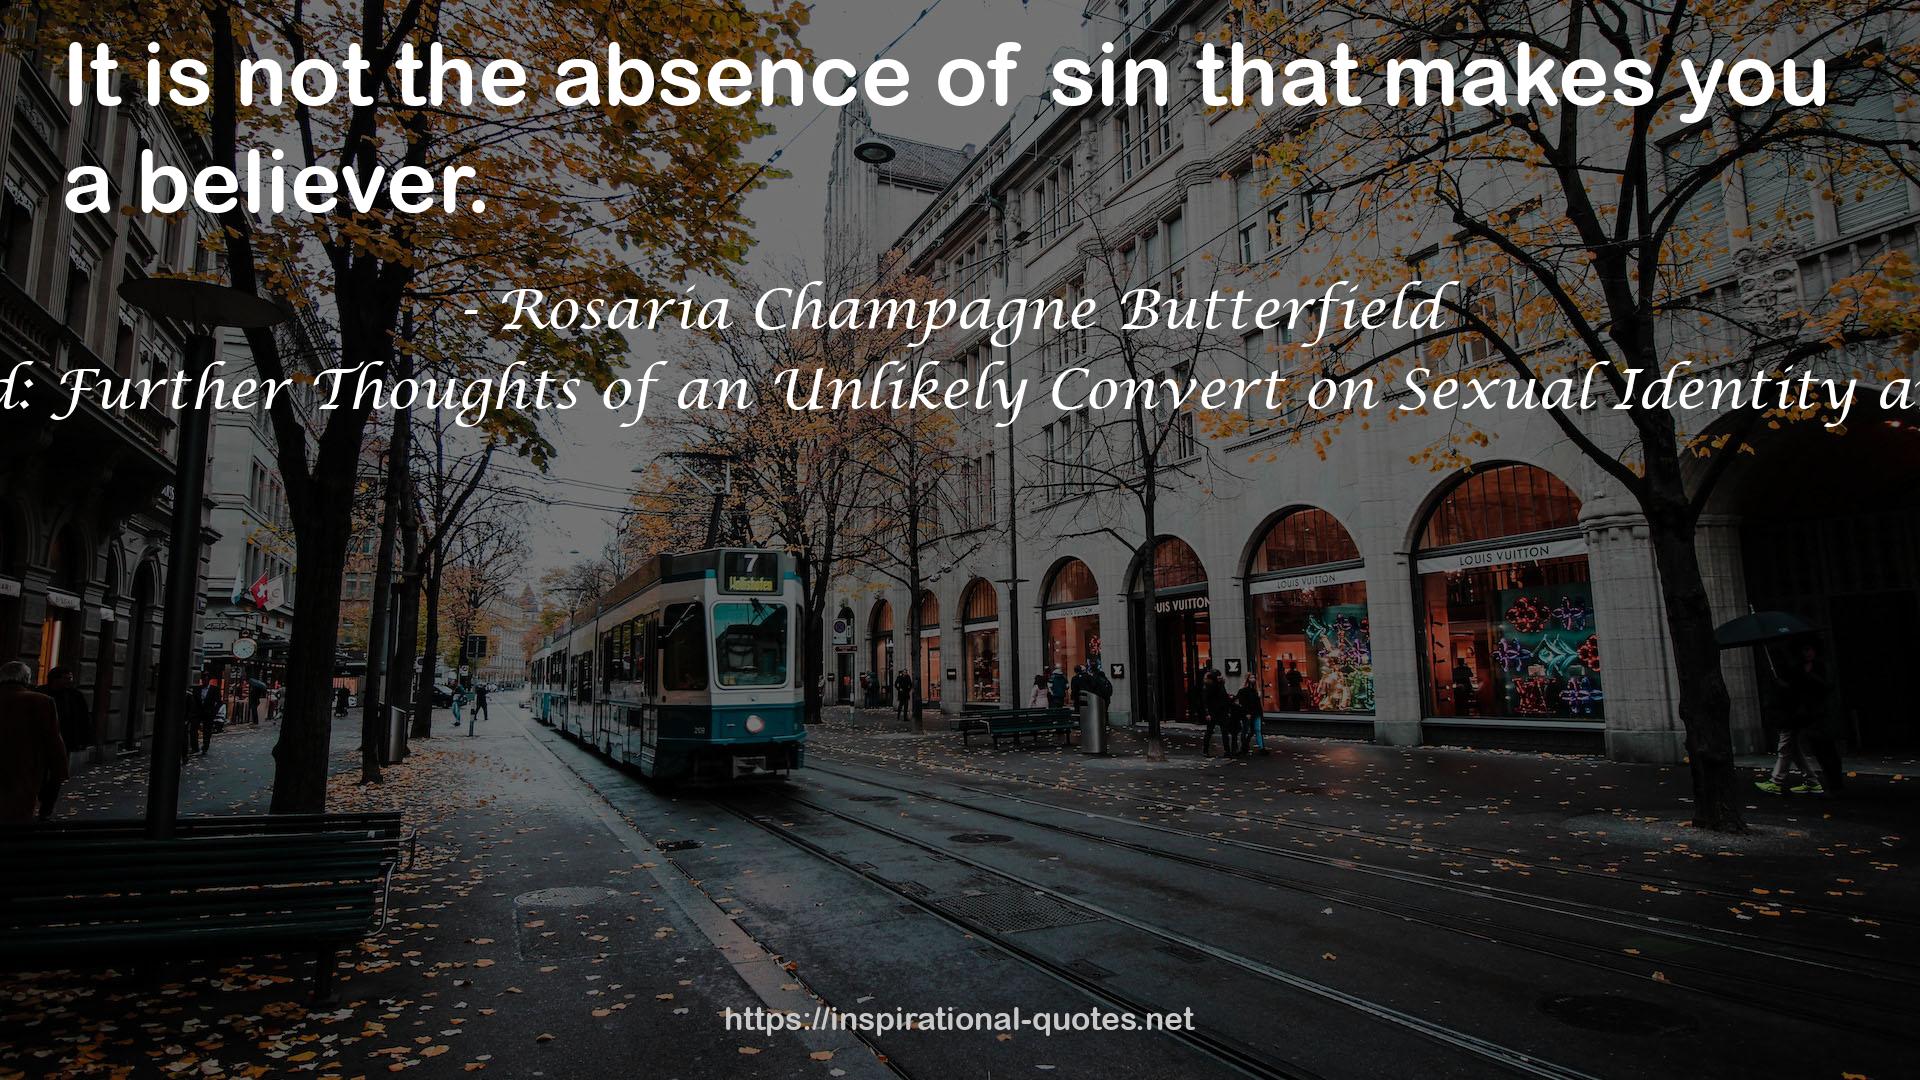 Openness Unhindered: Further Thoughts of an Unlikely Convert on Sexual Identity and Union with Christ QUOTES